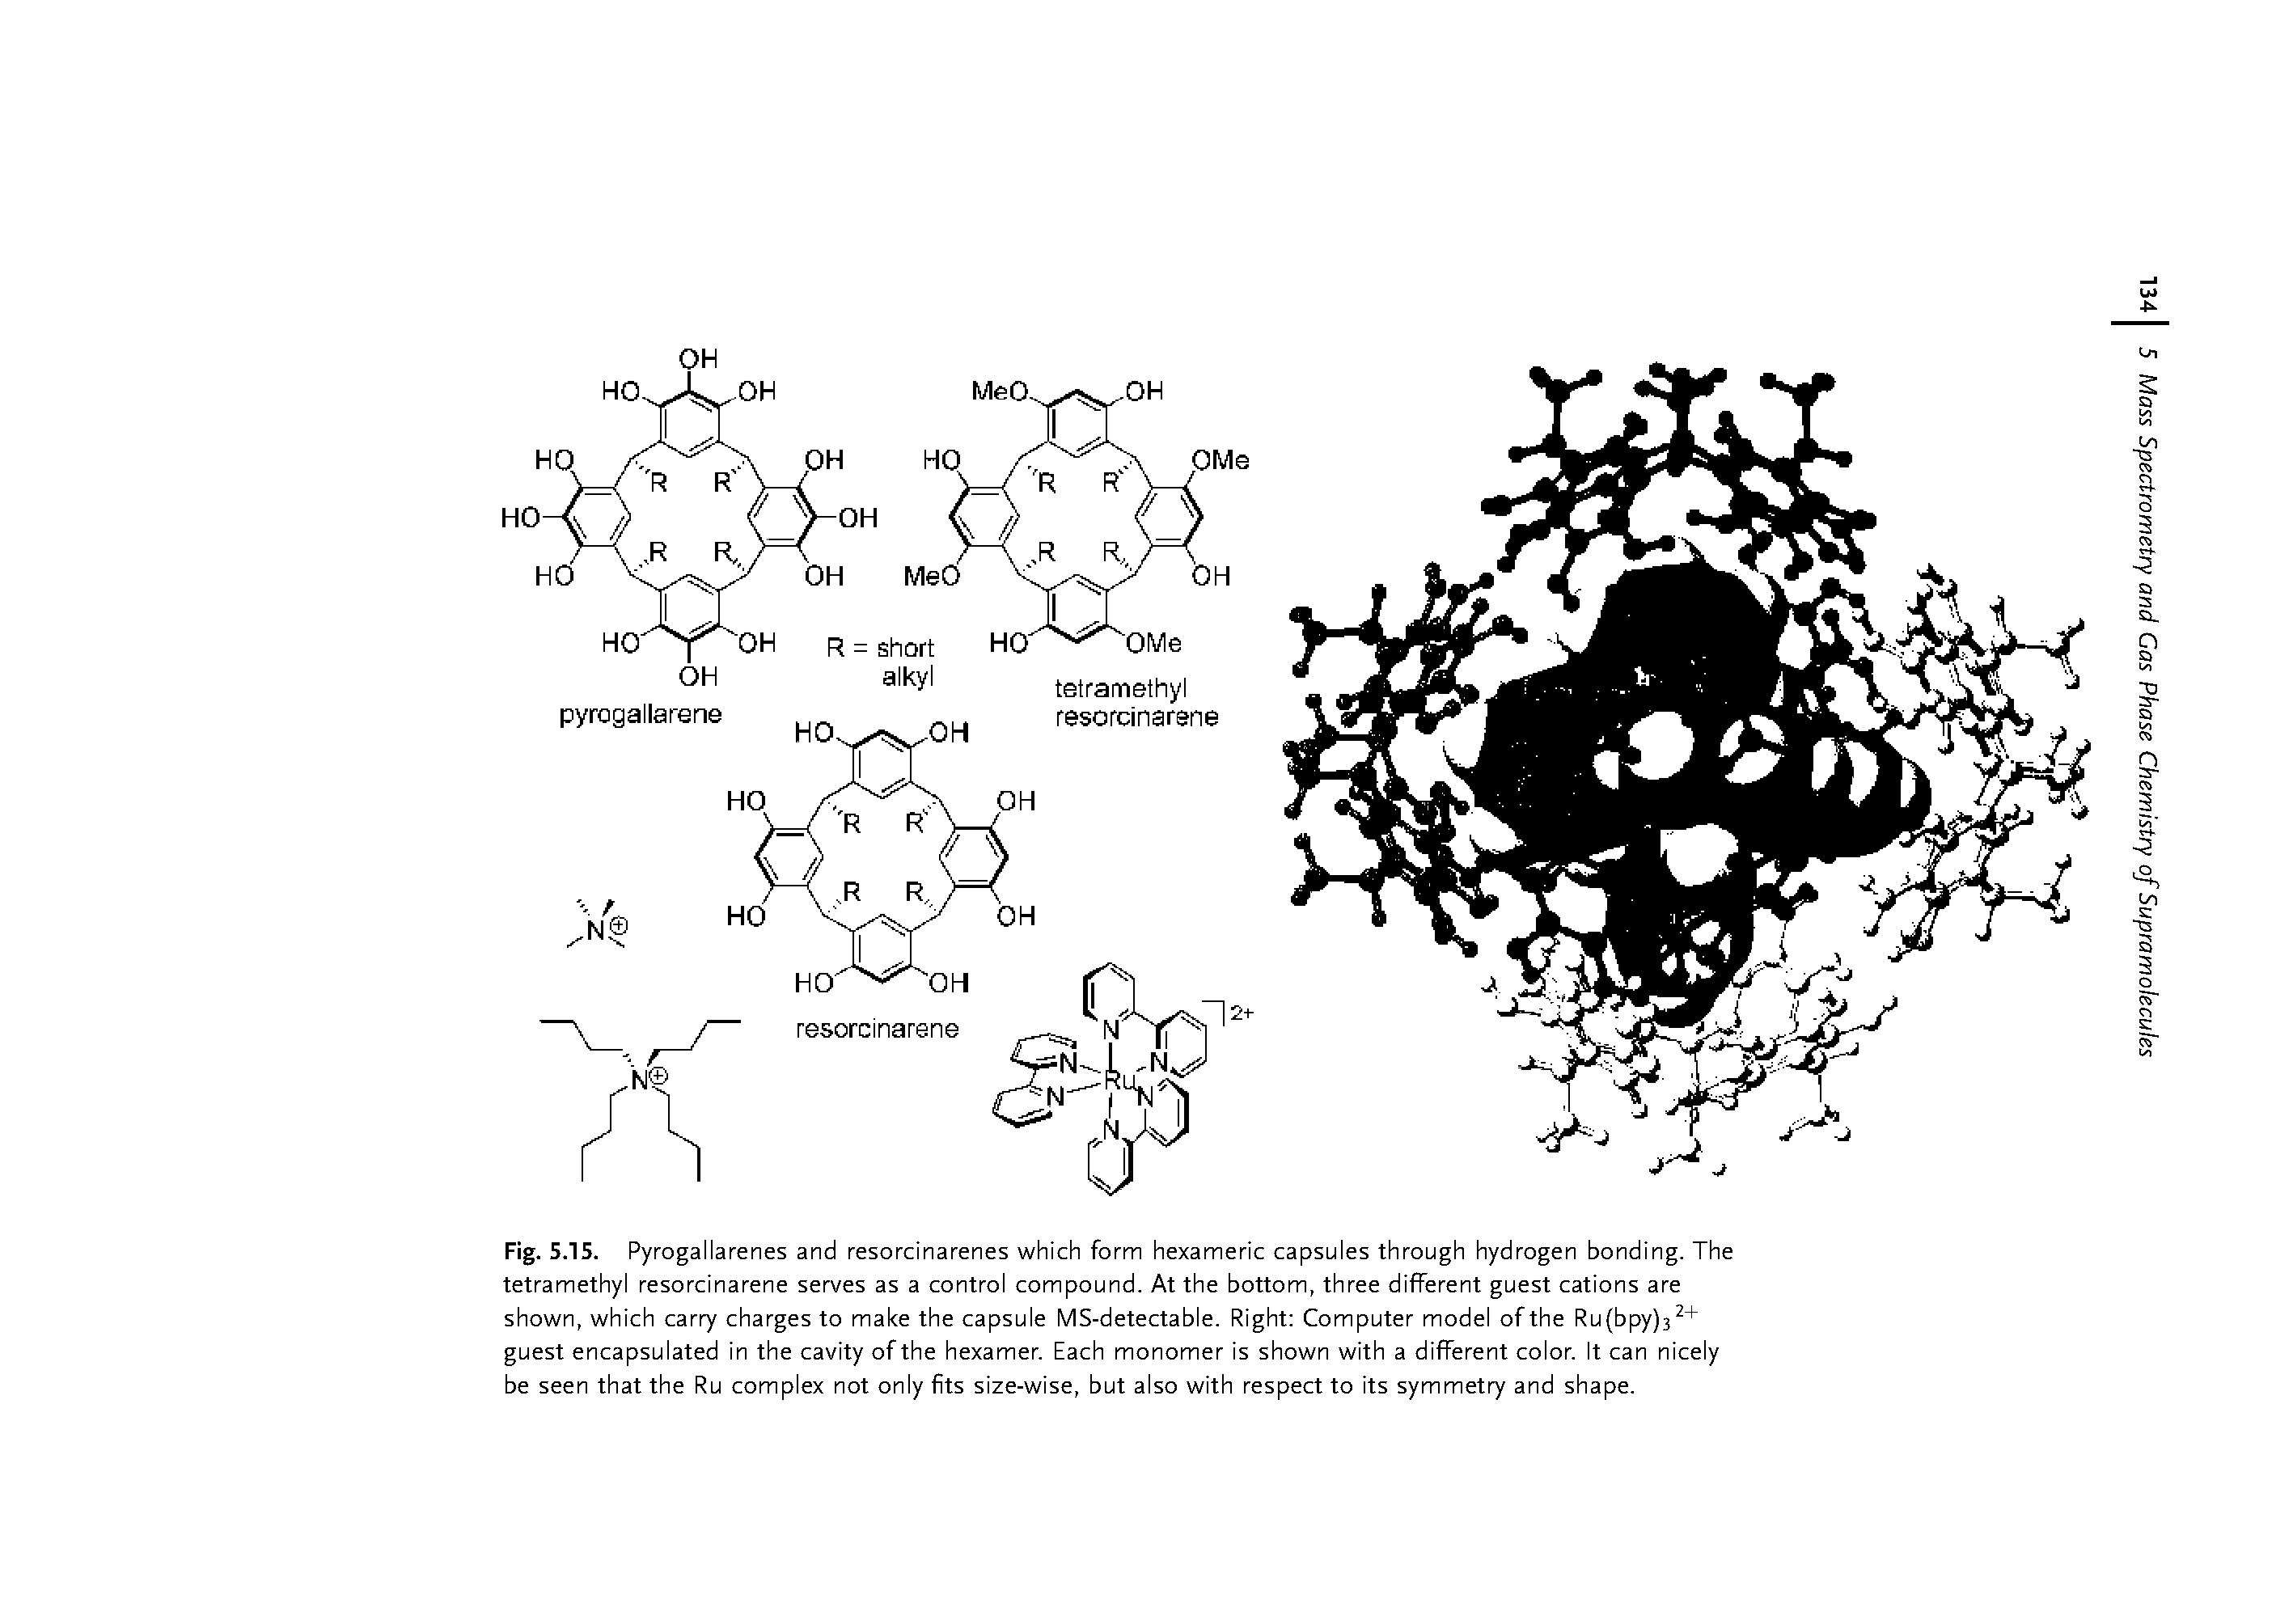 Fig. 5.15. Pyrogallarenes and resorcinarenes which form hexameric capsules through hydrogen bonding. The tetramethyl resorcinarene serves as a control compound. At the bottom, three different guest cations are shown, which carry charges to make the capsule MS-detectable. Right Computer model of the Ru(bpy)32 guest encapsulated in the cavity of the hexamer. Each monomer is shown with a different color. It can nicely be seen that the Ru complex not only fits size-wise, but also with respect to its symmetry and shape.